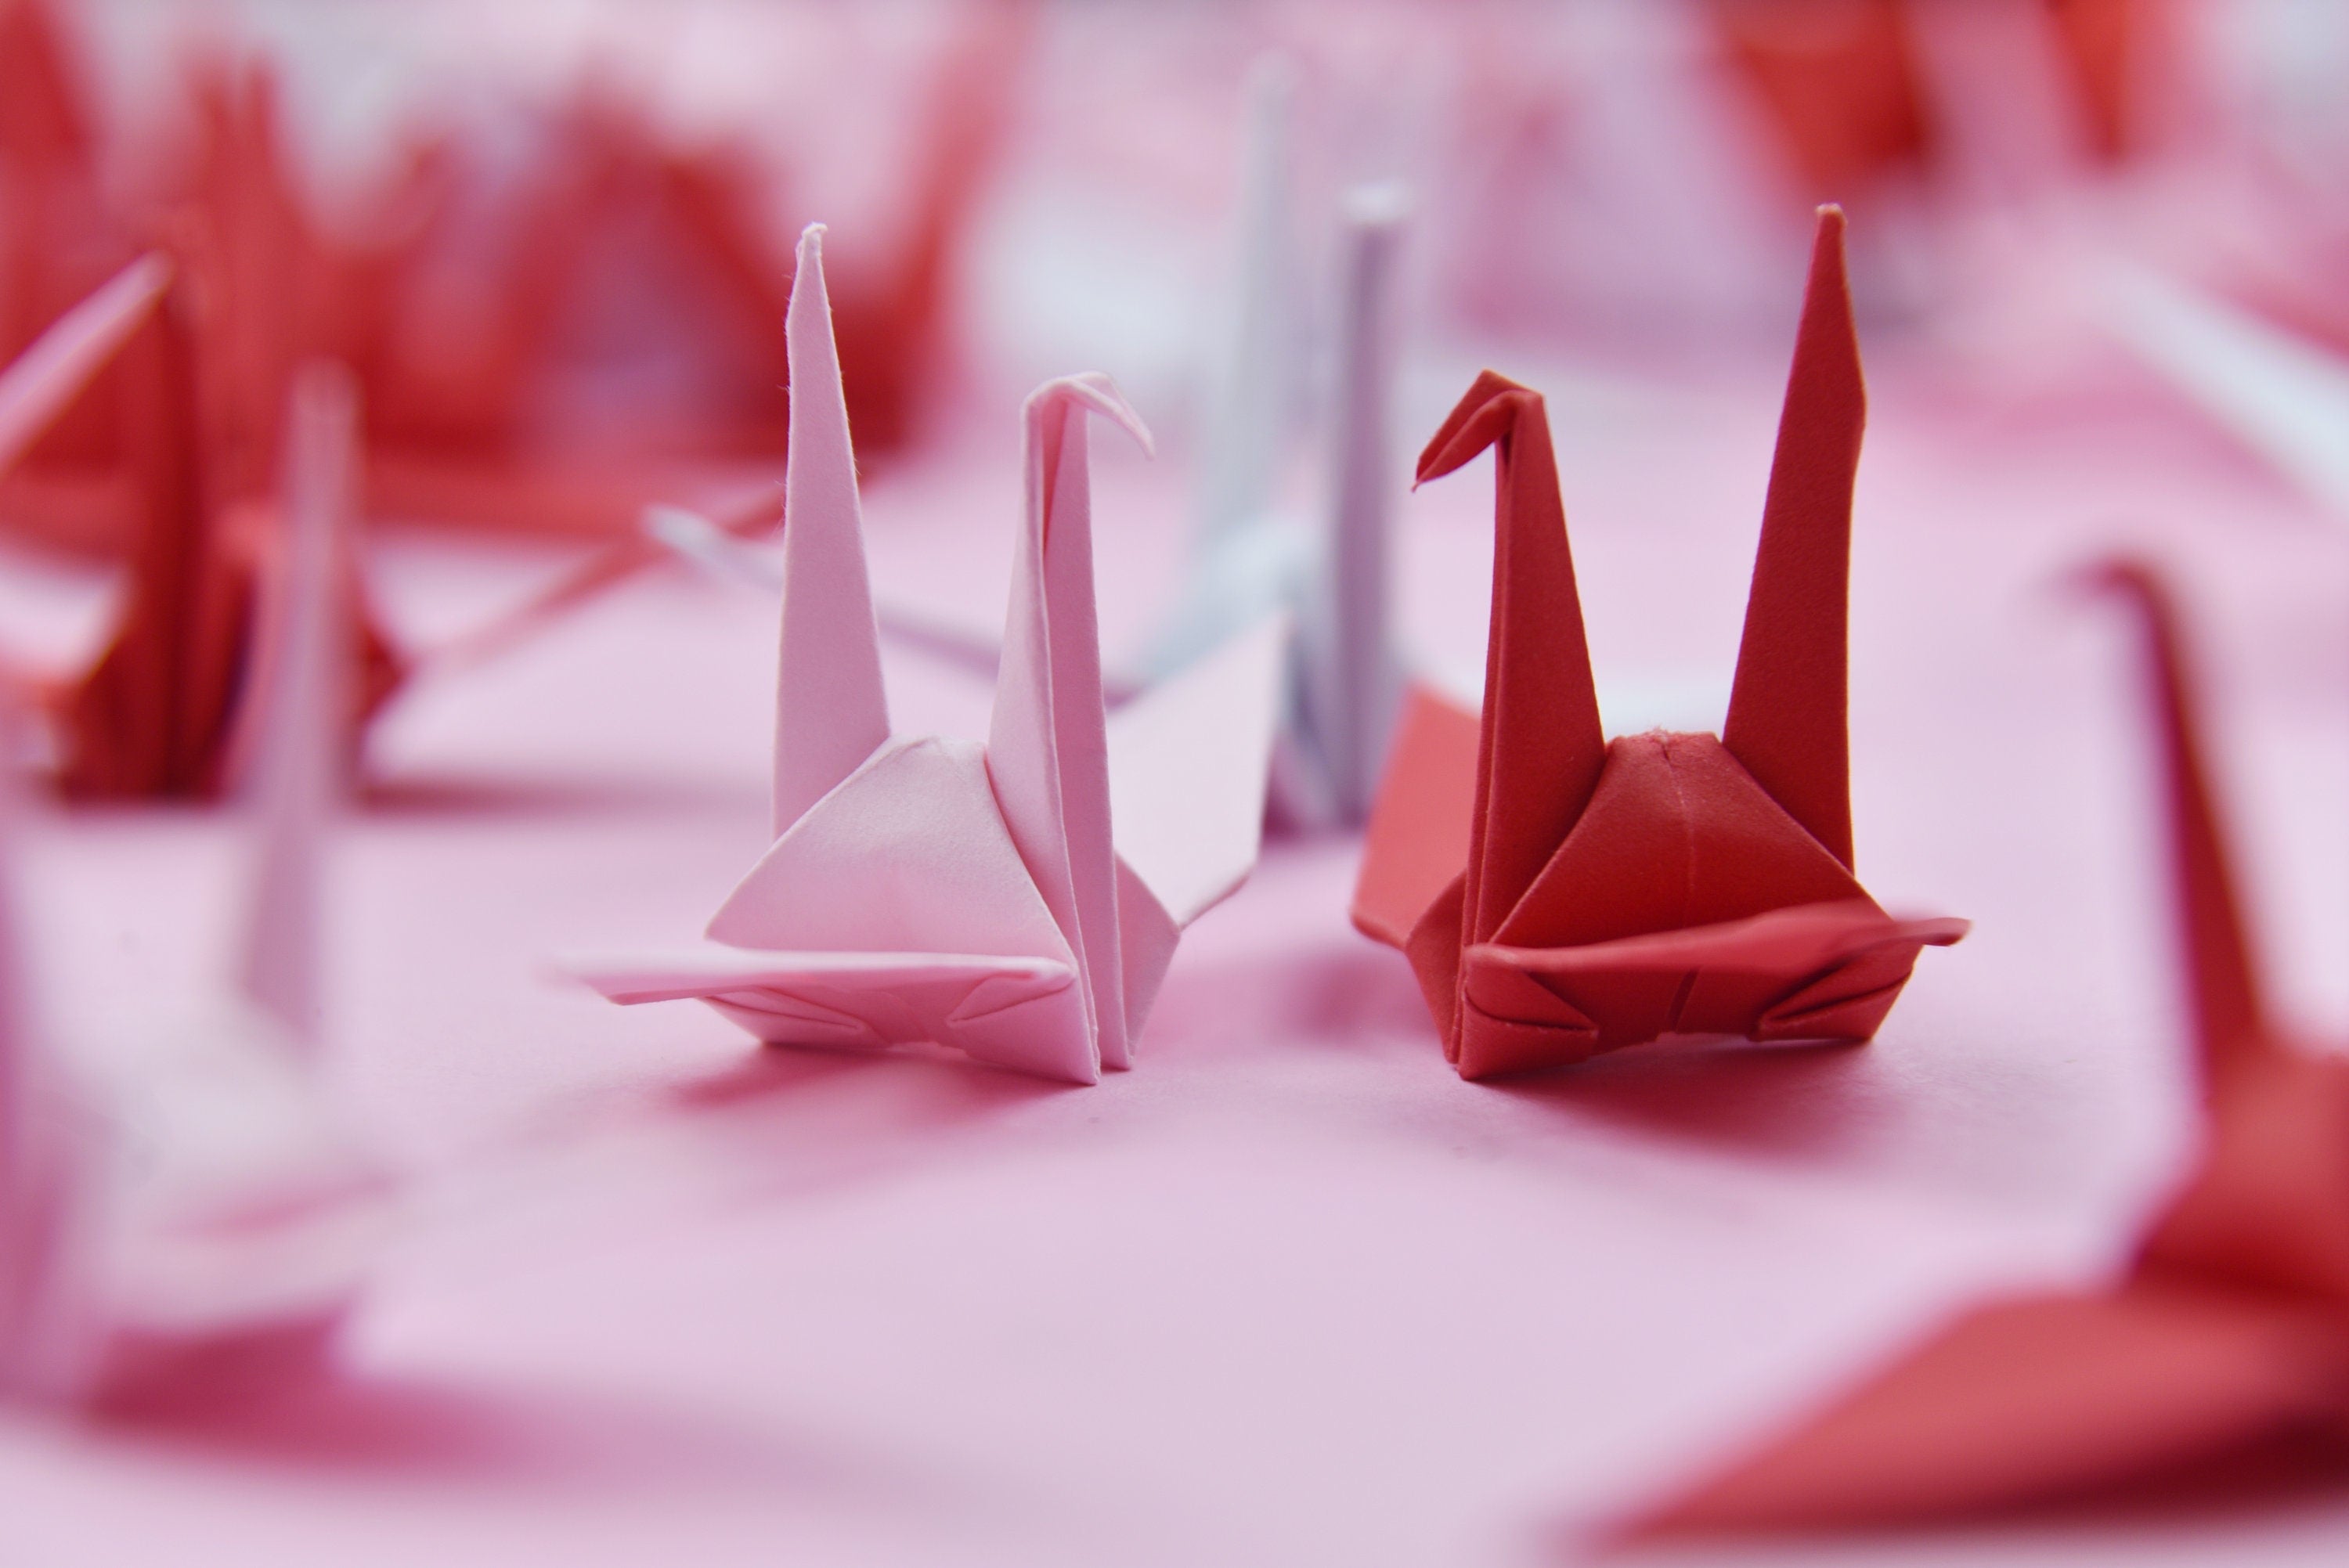 100 Origami Paper Crane Red 3x3 inches Handmade Folding for Wedding Decoration, Japanese Wedding, Valentines